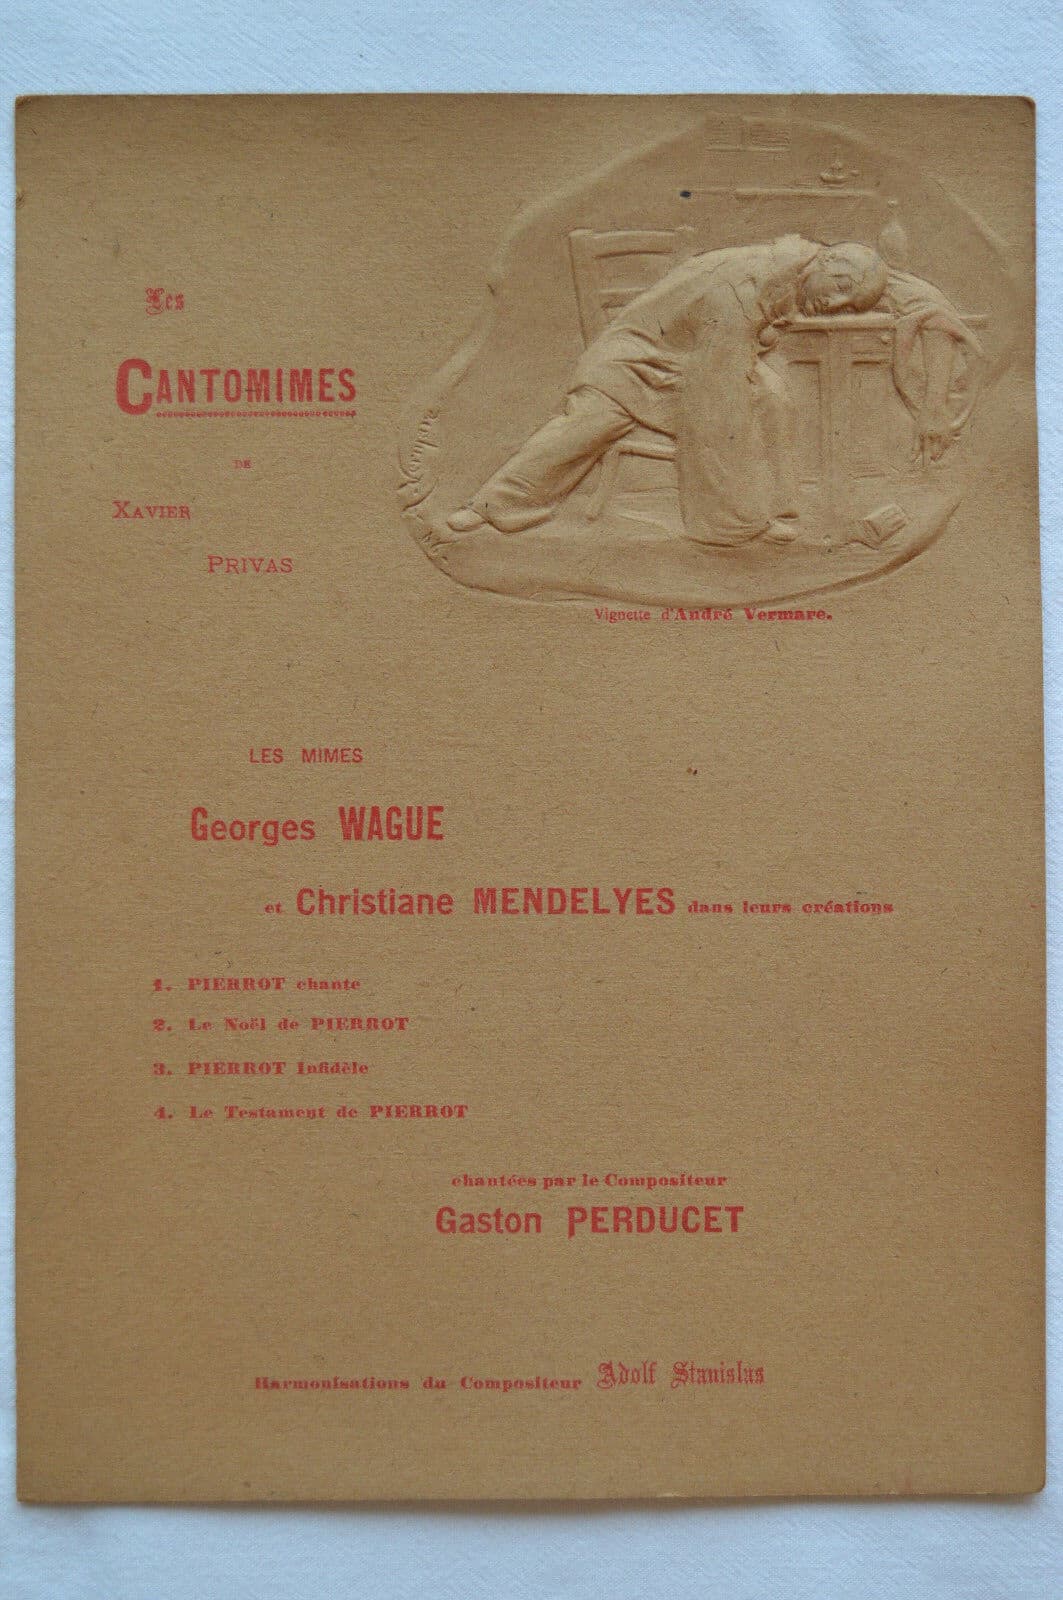 Cantomimes program, with Pierrot shown in a relief vignette by André Vermare